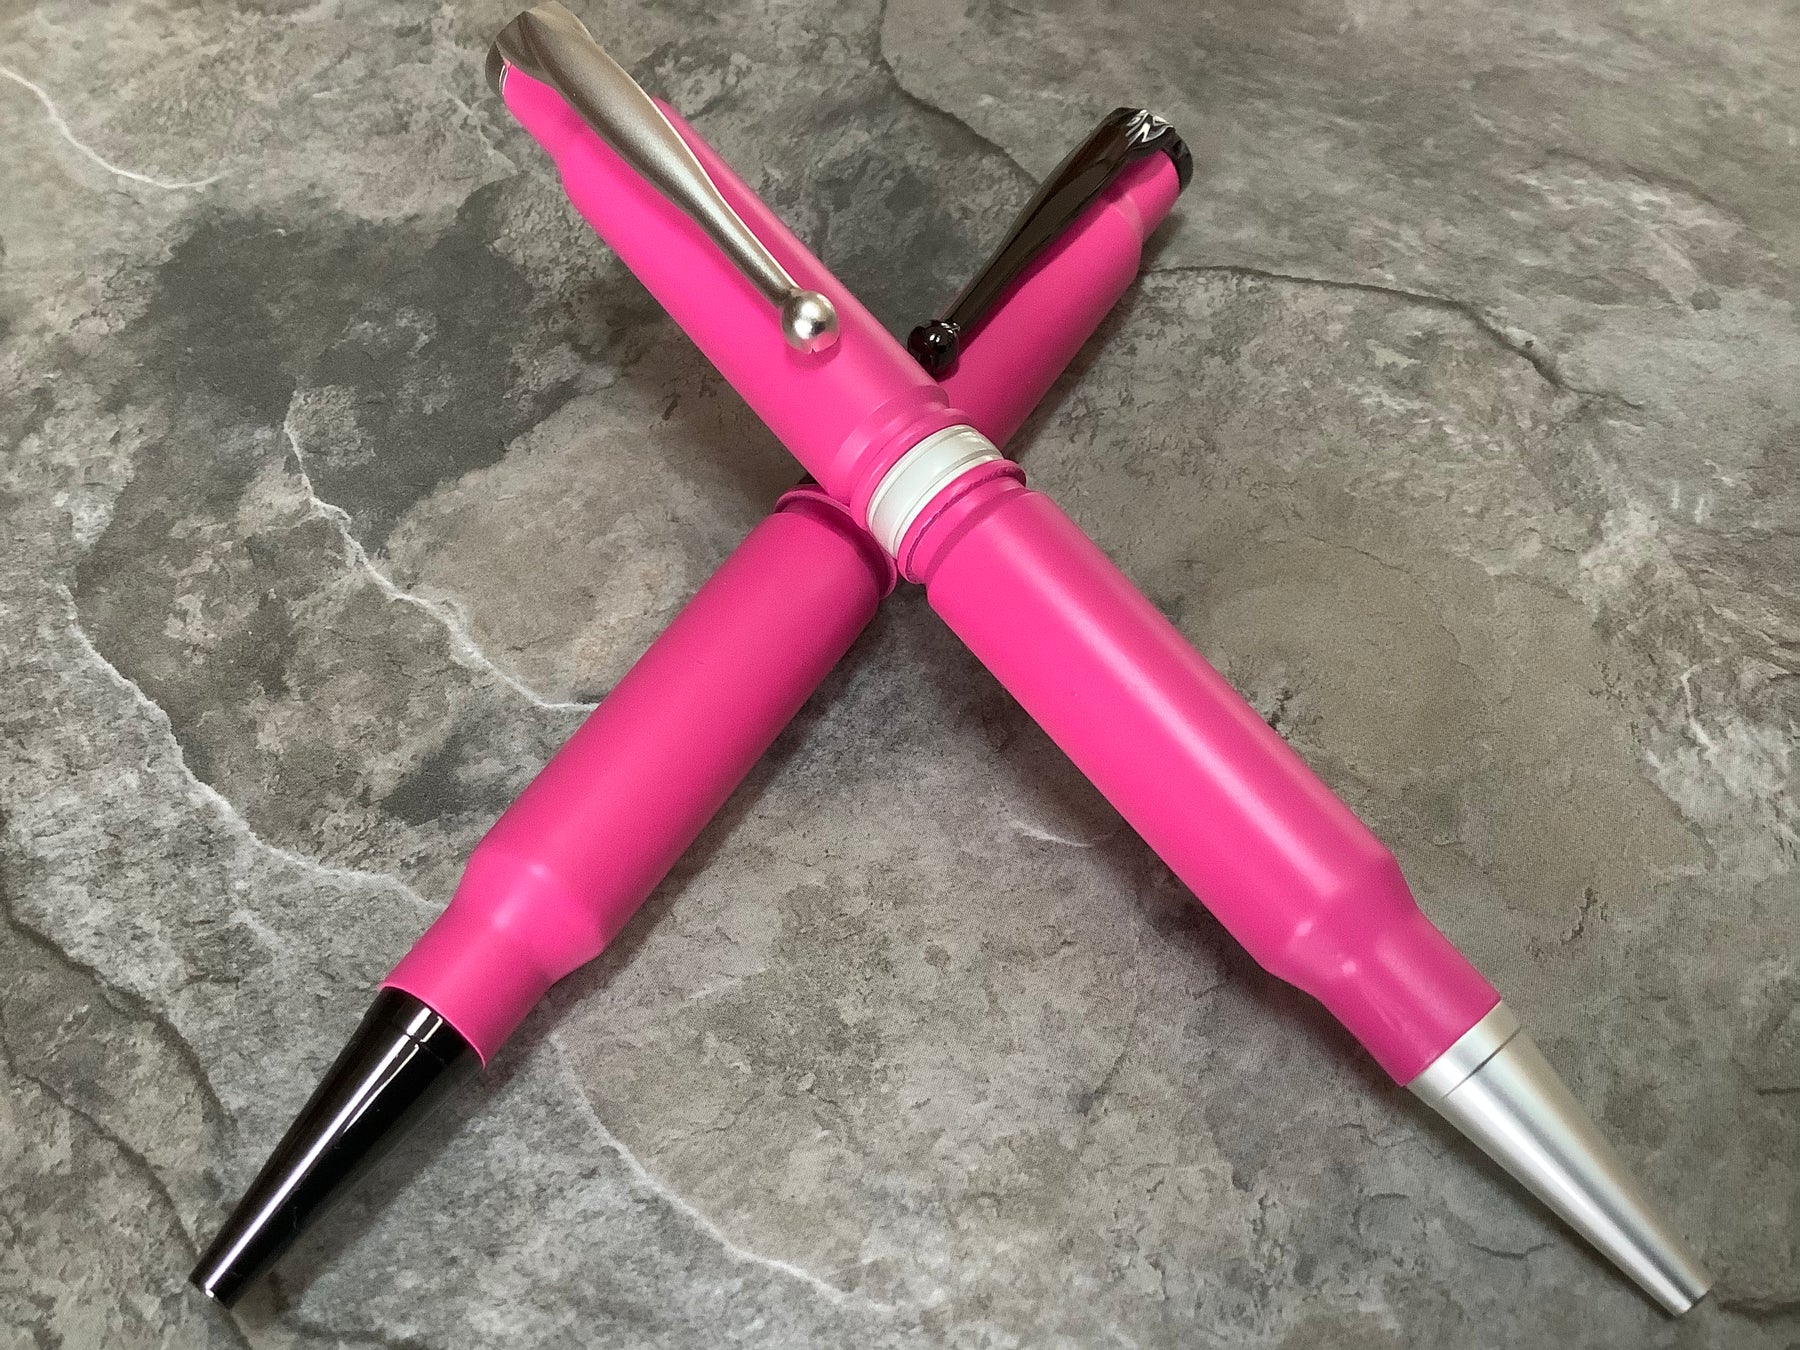 Yeaqee 200 Pcs Breast Cancer Pens Retractable Ballpoint Pink